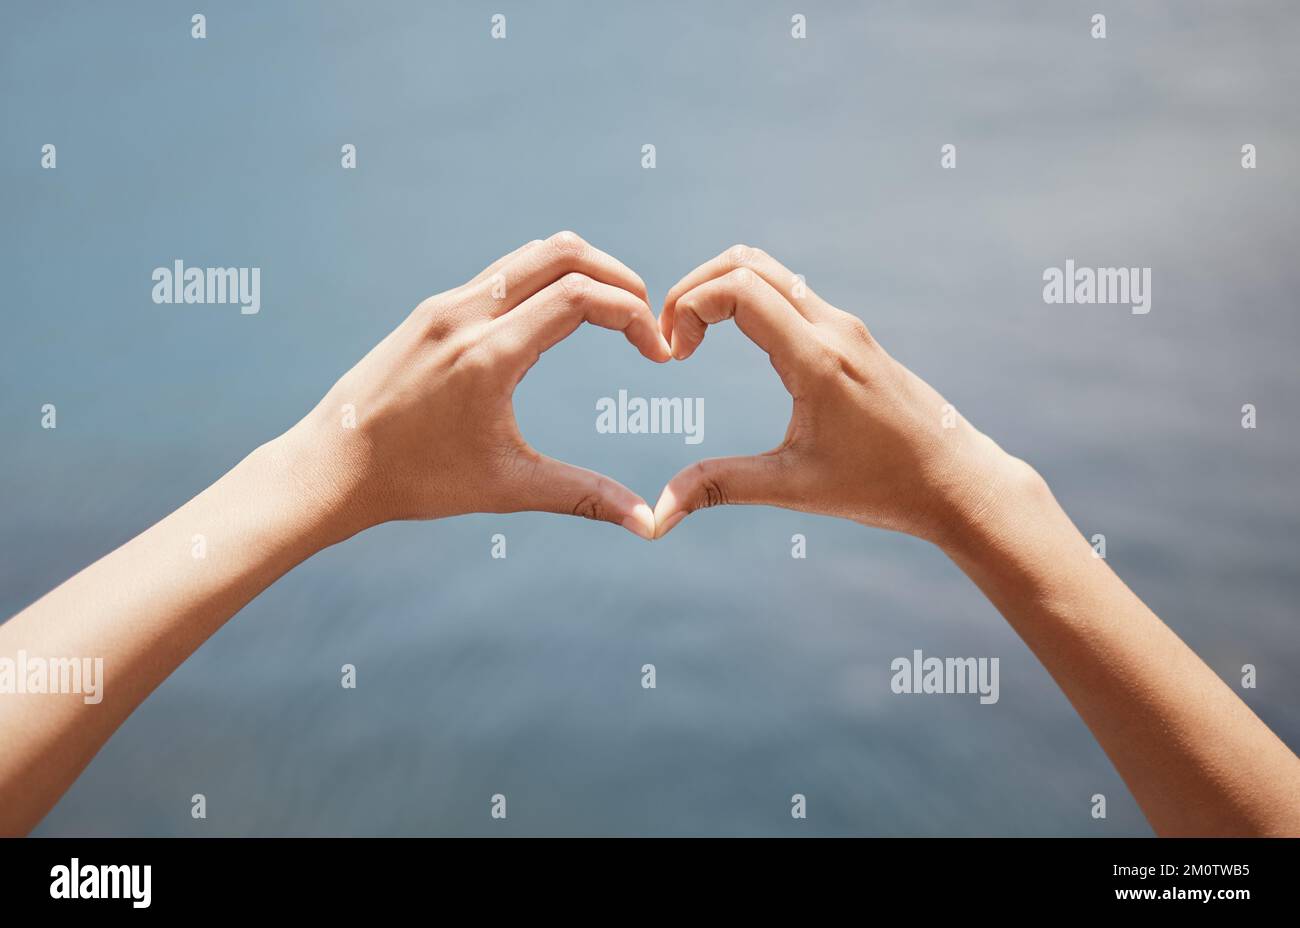 Where there is love, there is life. Closeup shot of an unrecognisable woman making a heart shape with her hands against a grey background. Stock Photo